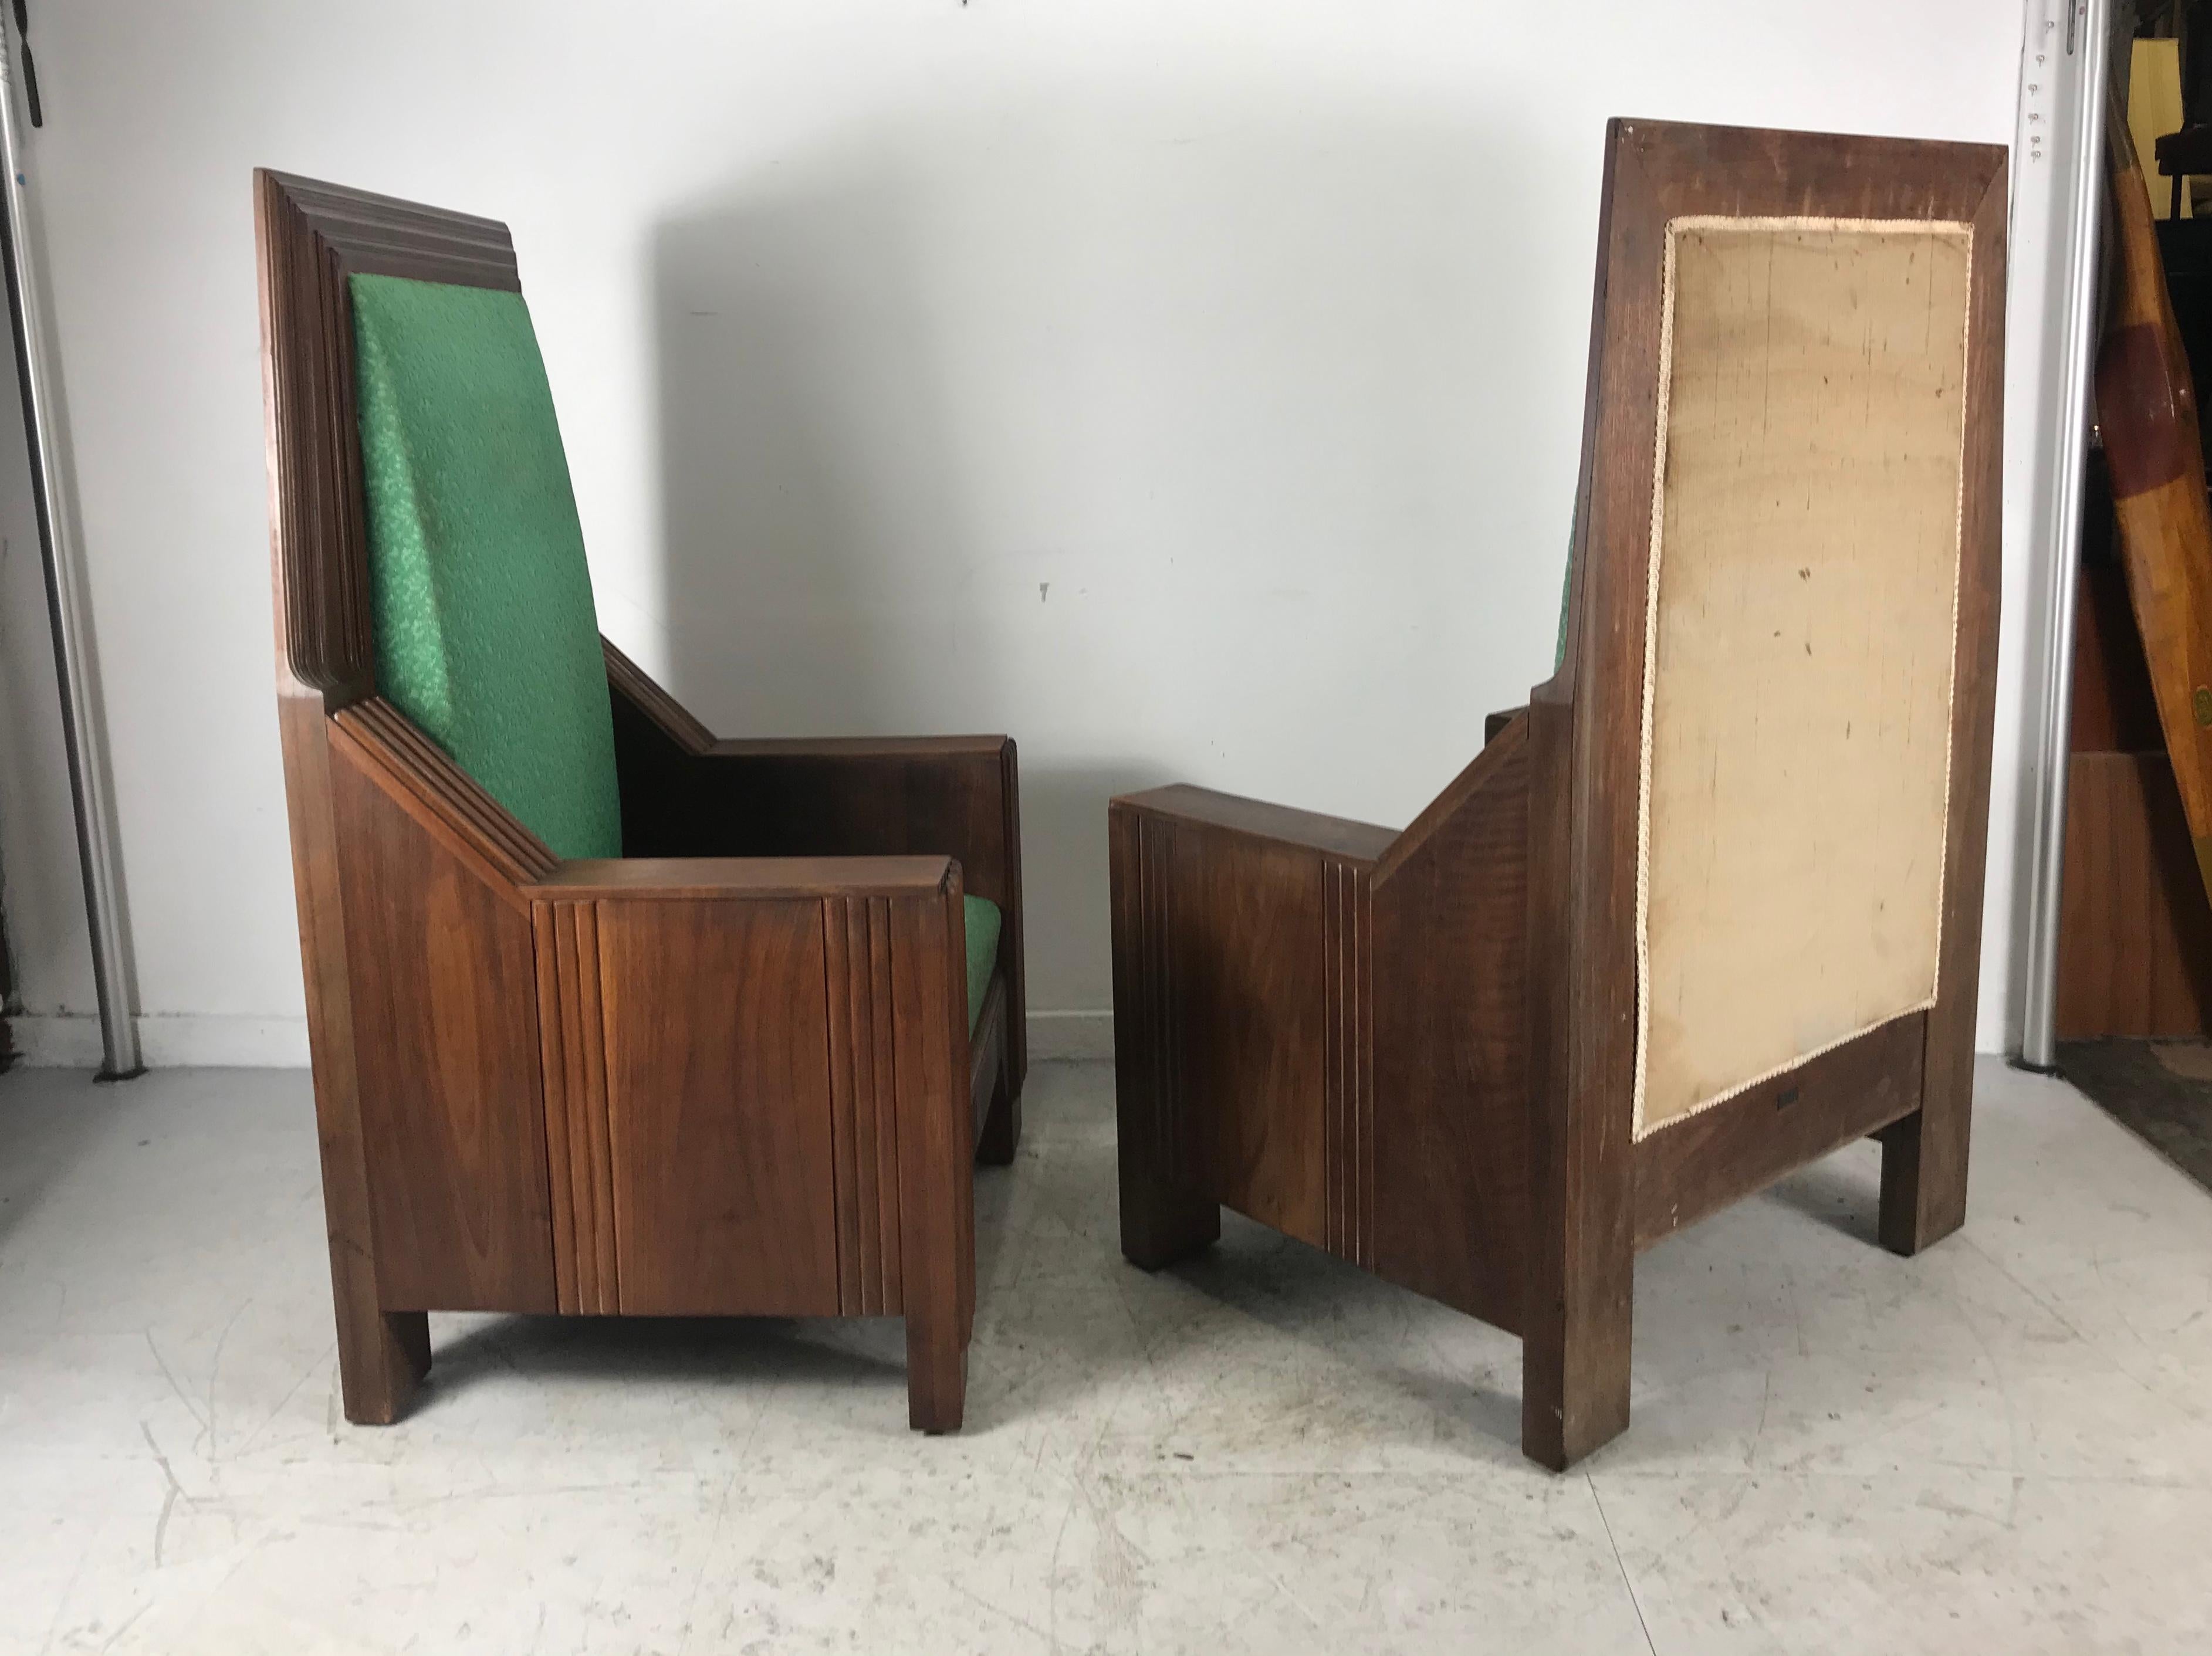 Monumental Art Deco throne chairs, manufactured by The Henderson Ames Co. amazing design! Wonderful scale and proportion. I believe these to be out of an odd fellows or Masonic temple, superior quality and construction, solid walnut. Retains green